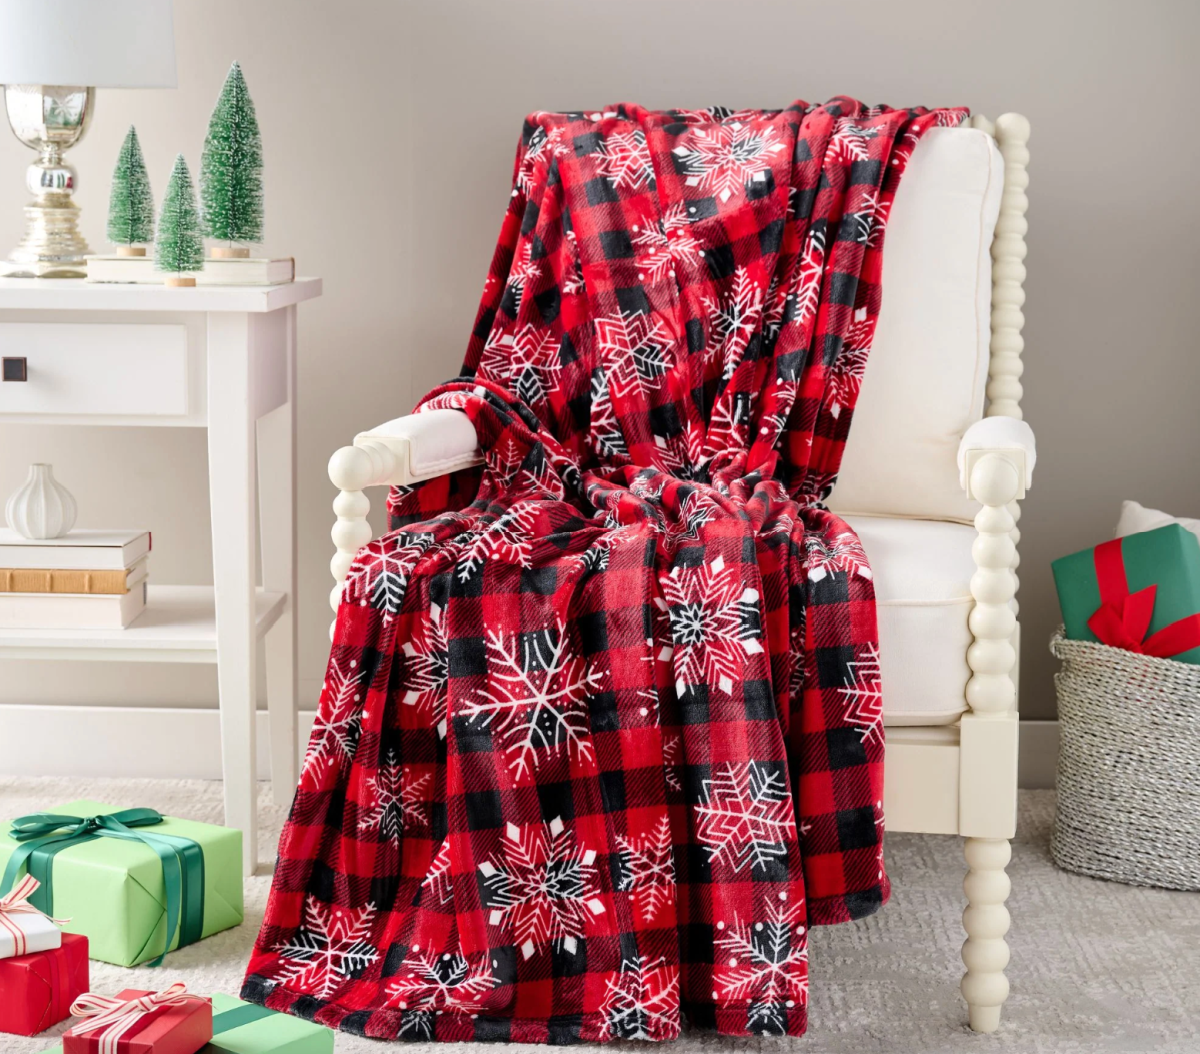 A Kringle Express Nostalgic Throw Blanket draped over a chair that you can buy at a discount with a QVC promo code for 2023